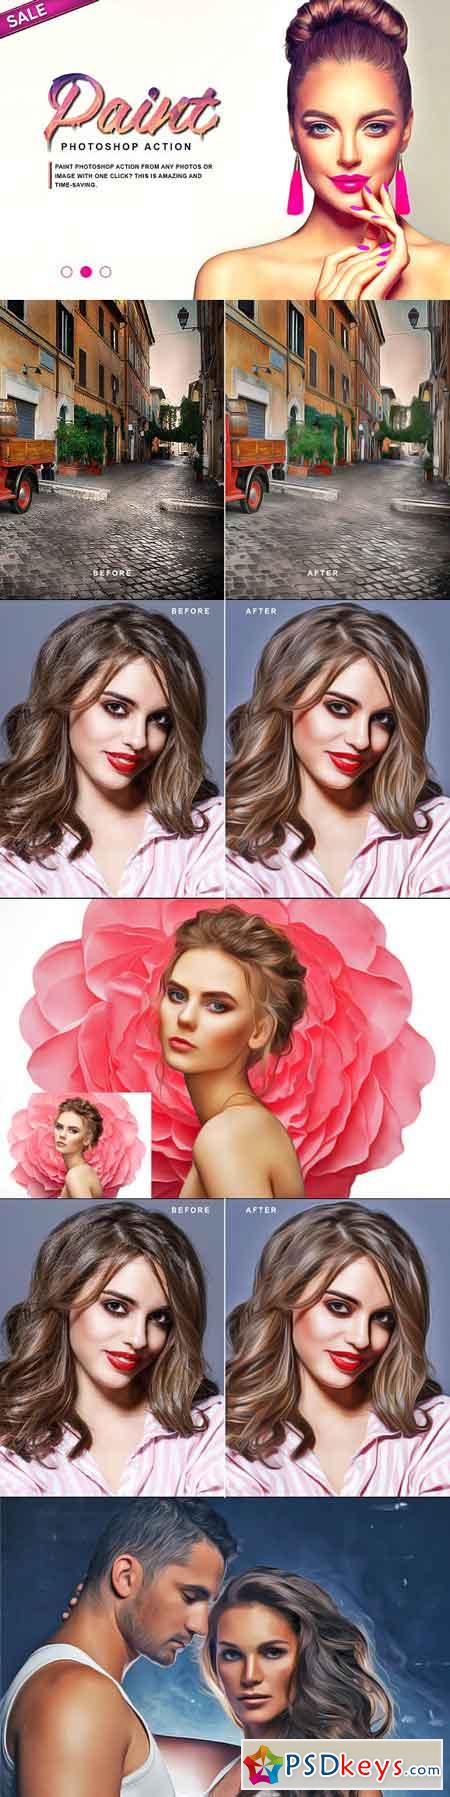 Paint Drawing Photoshop Action 2945512